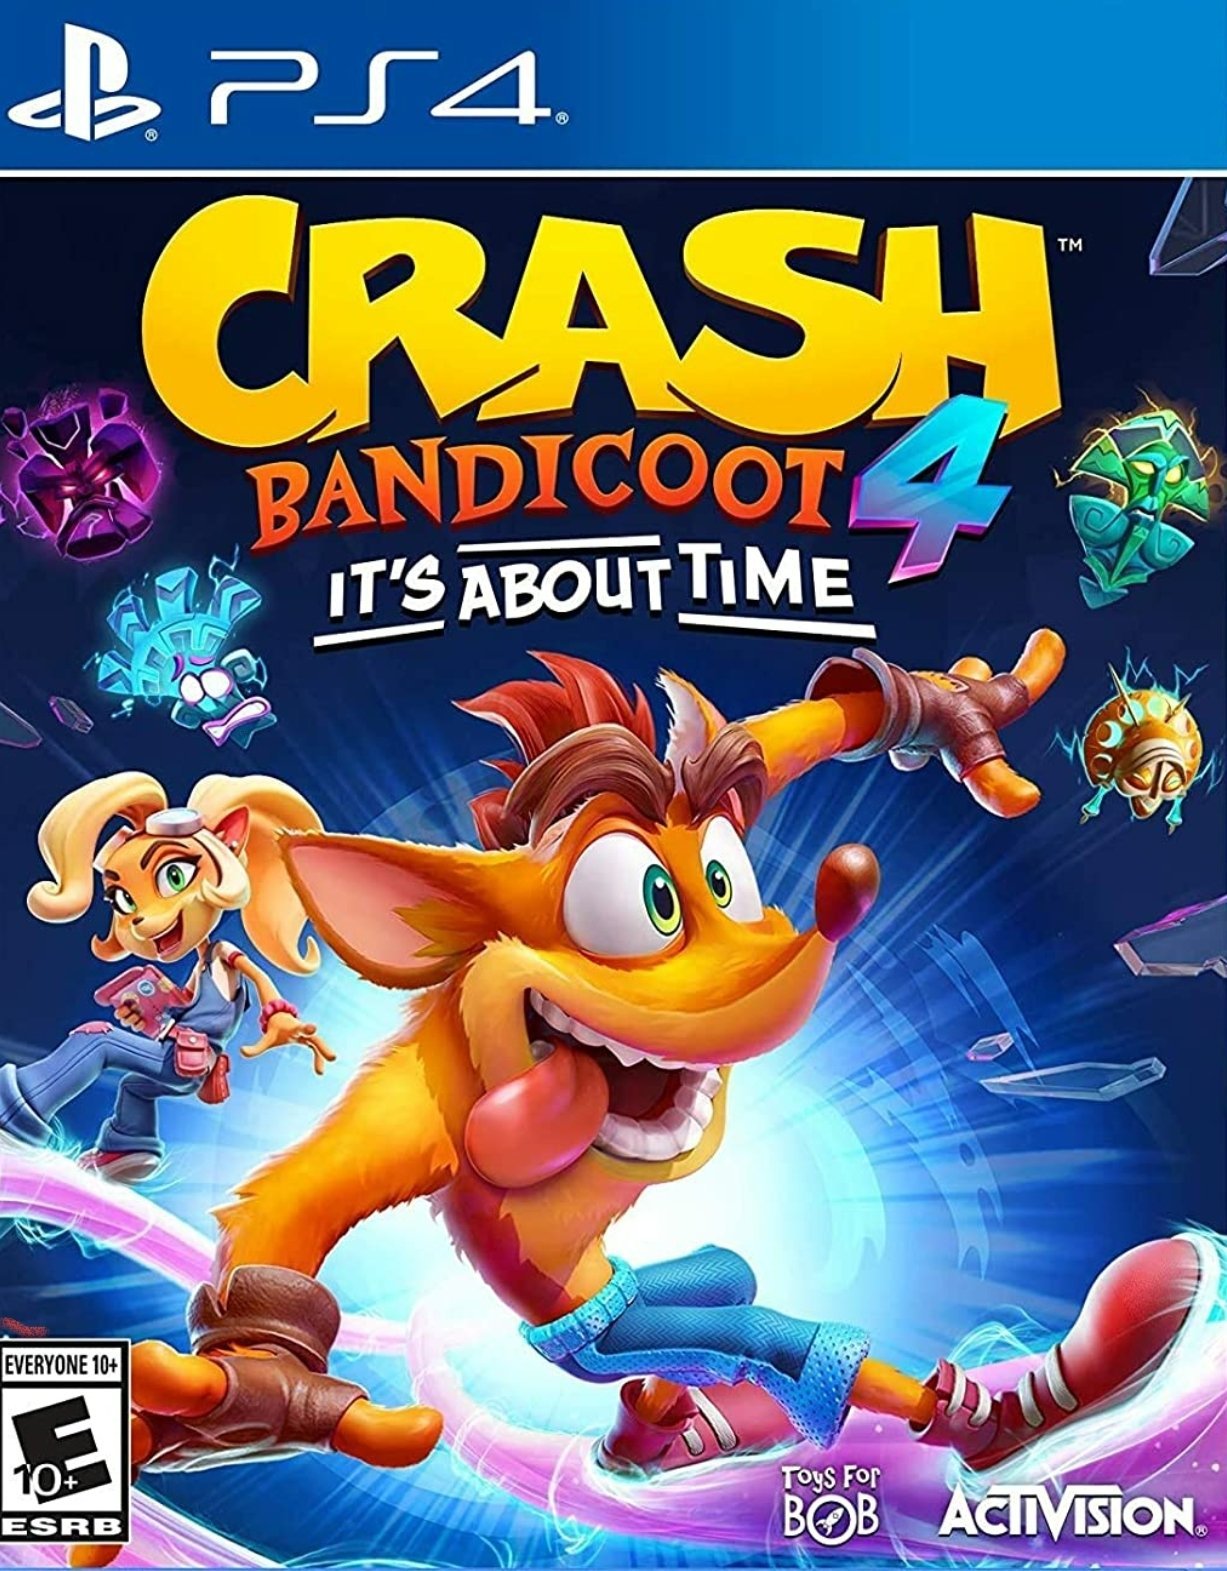 CRASH BANDICOOT 4 IT'S ABOUT TIME + COLECCIONABLE - Easy Video Game